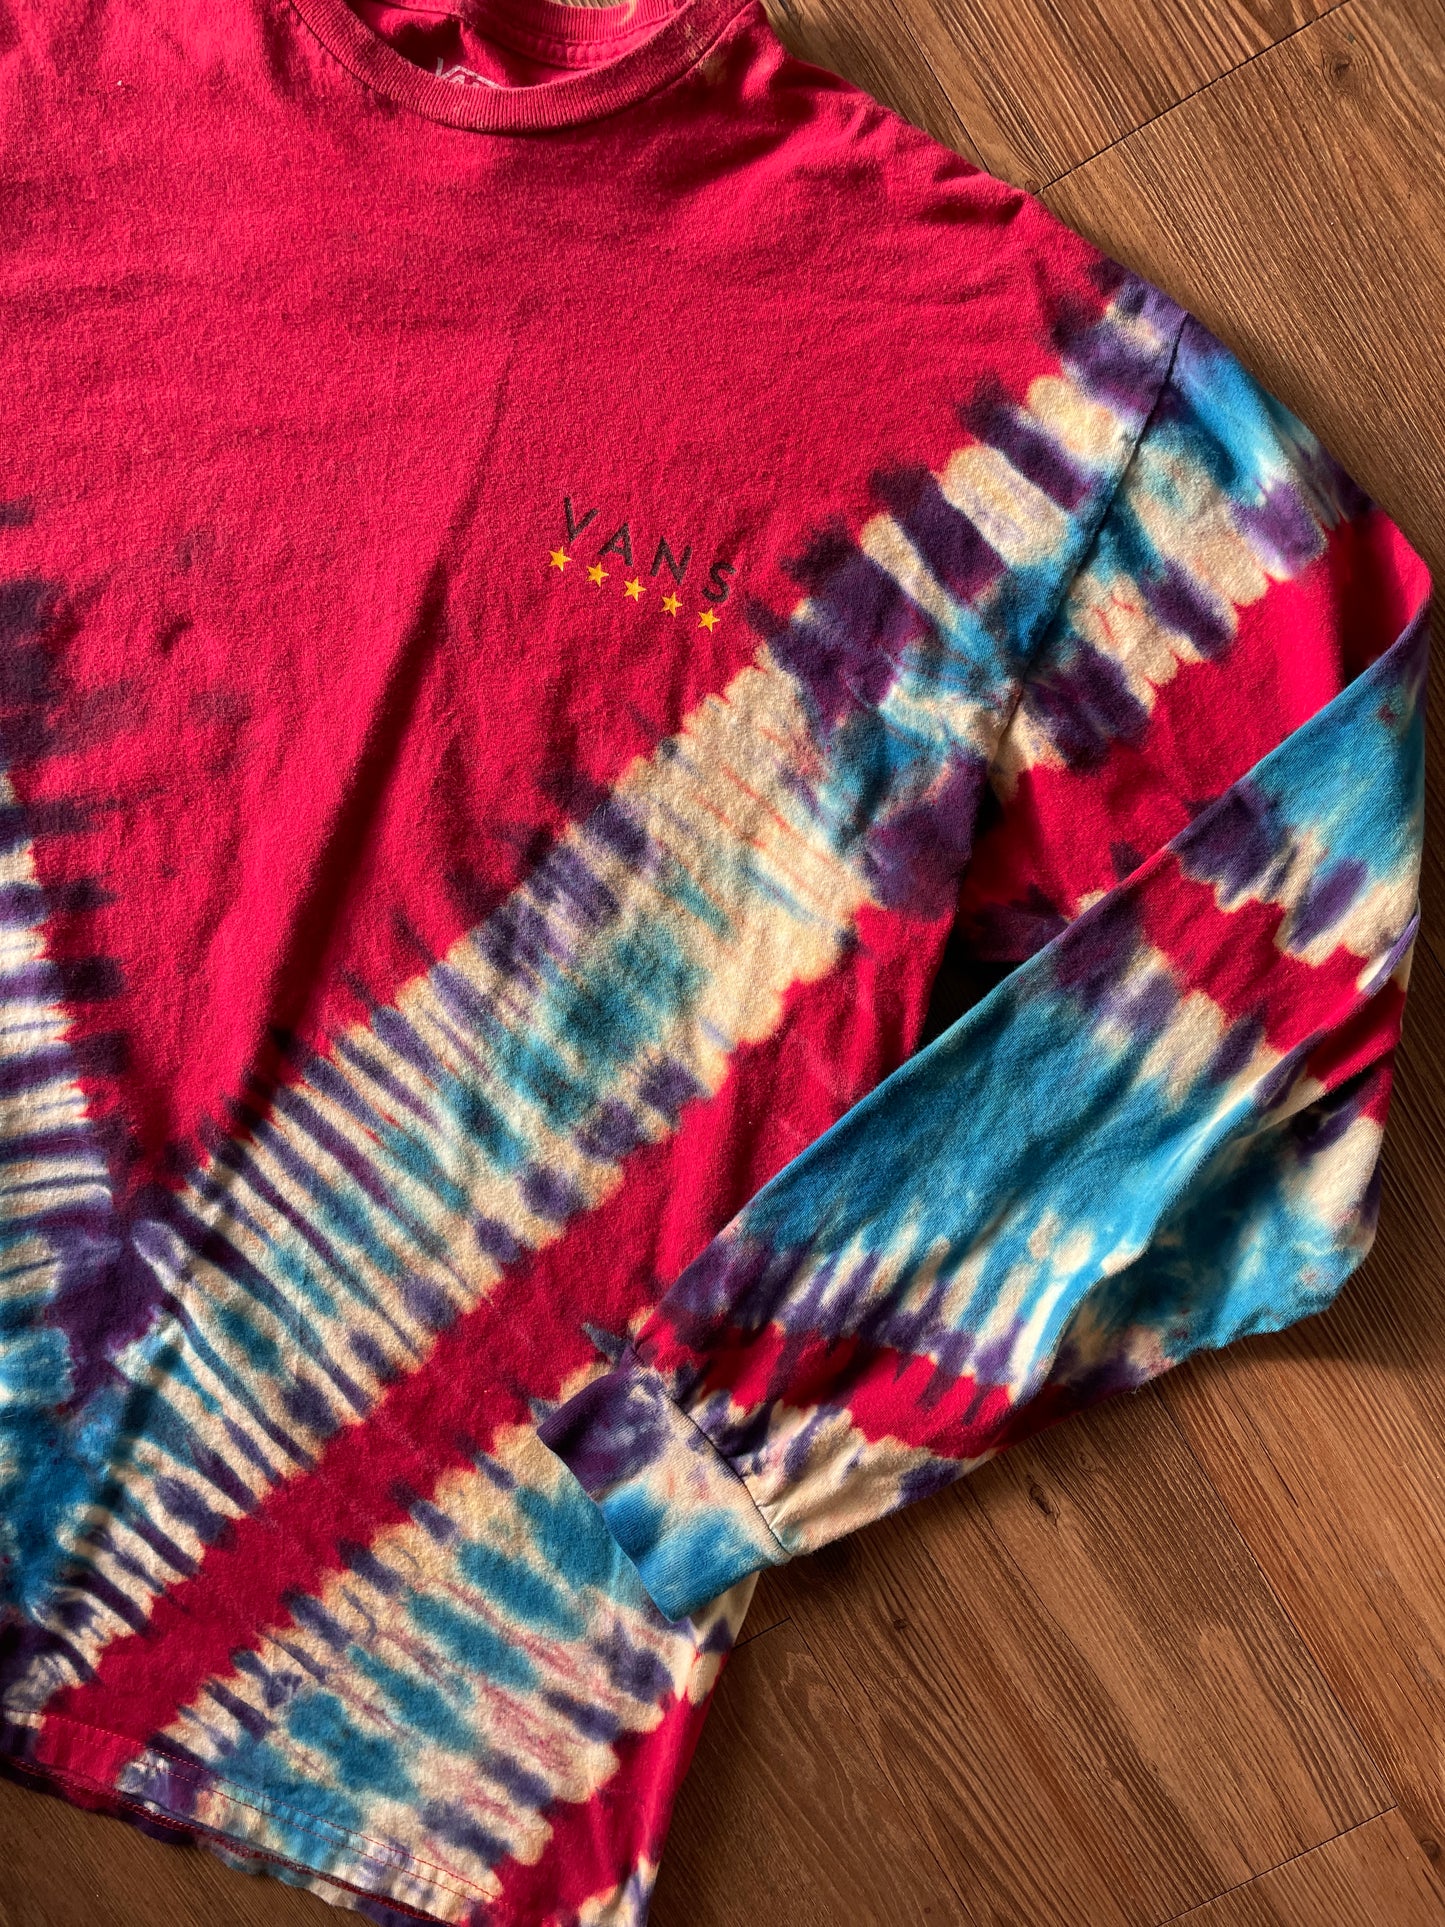 XL Men’s Vans Off The Walls Handmade Reverse Tie Dye Long Sleeve T-Short | Red, White, and Blue V-Pleated Long Sleeve